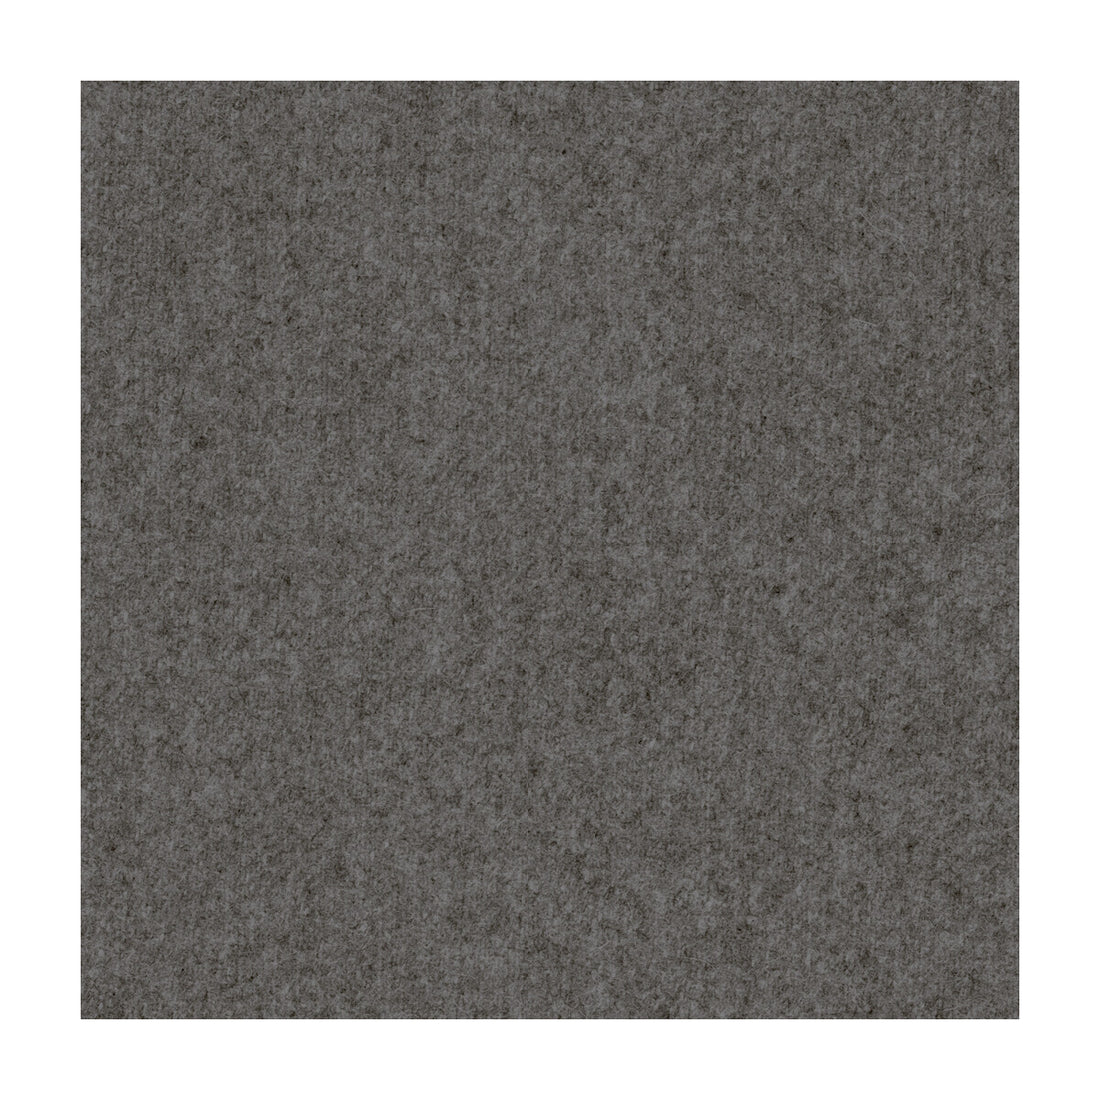 Jefferson Wool fabric in granite color - pattern 34397.21.0 - by Kravet Contract